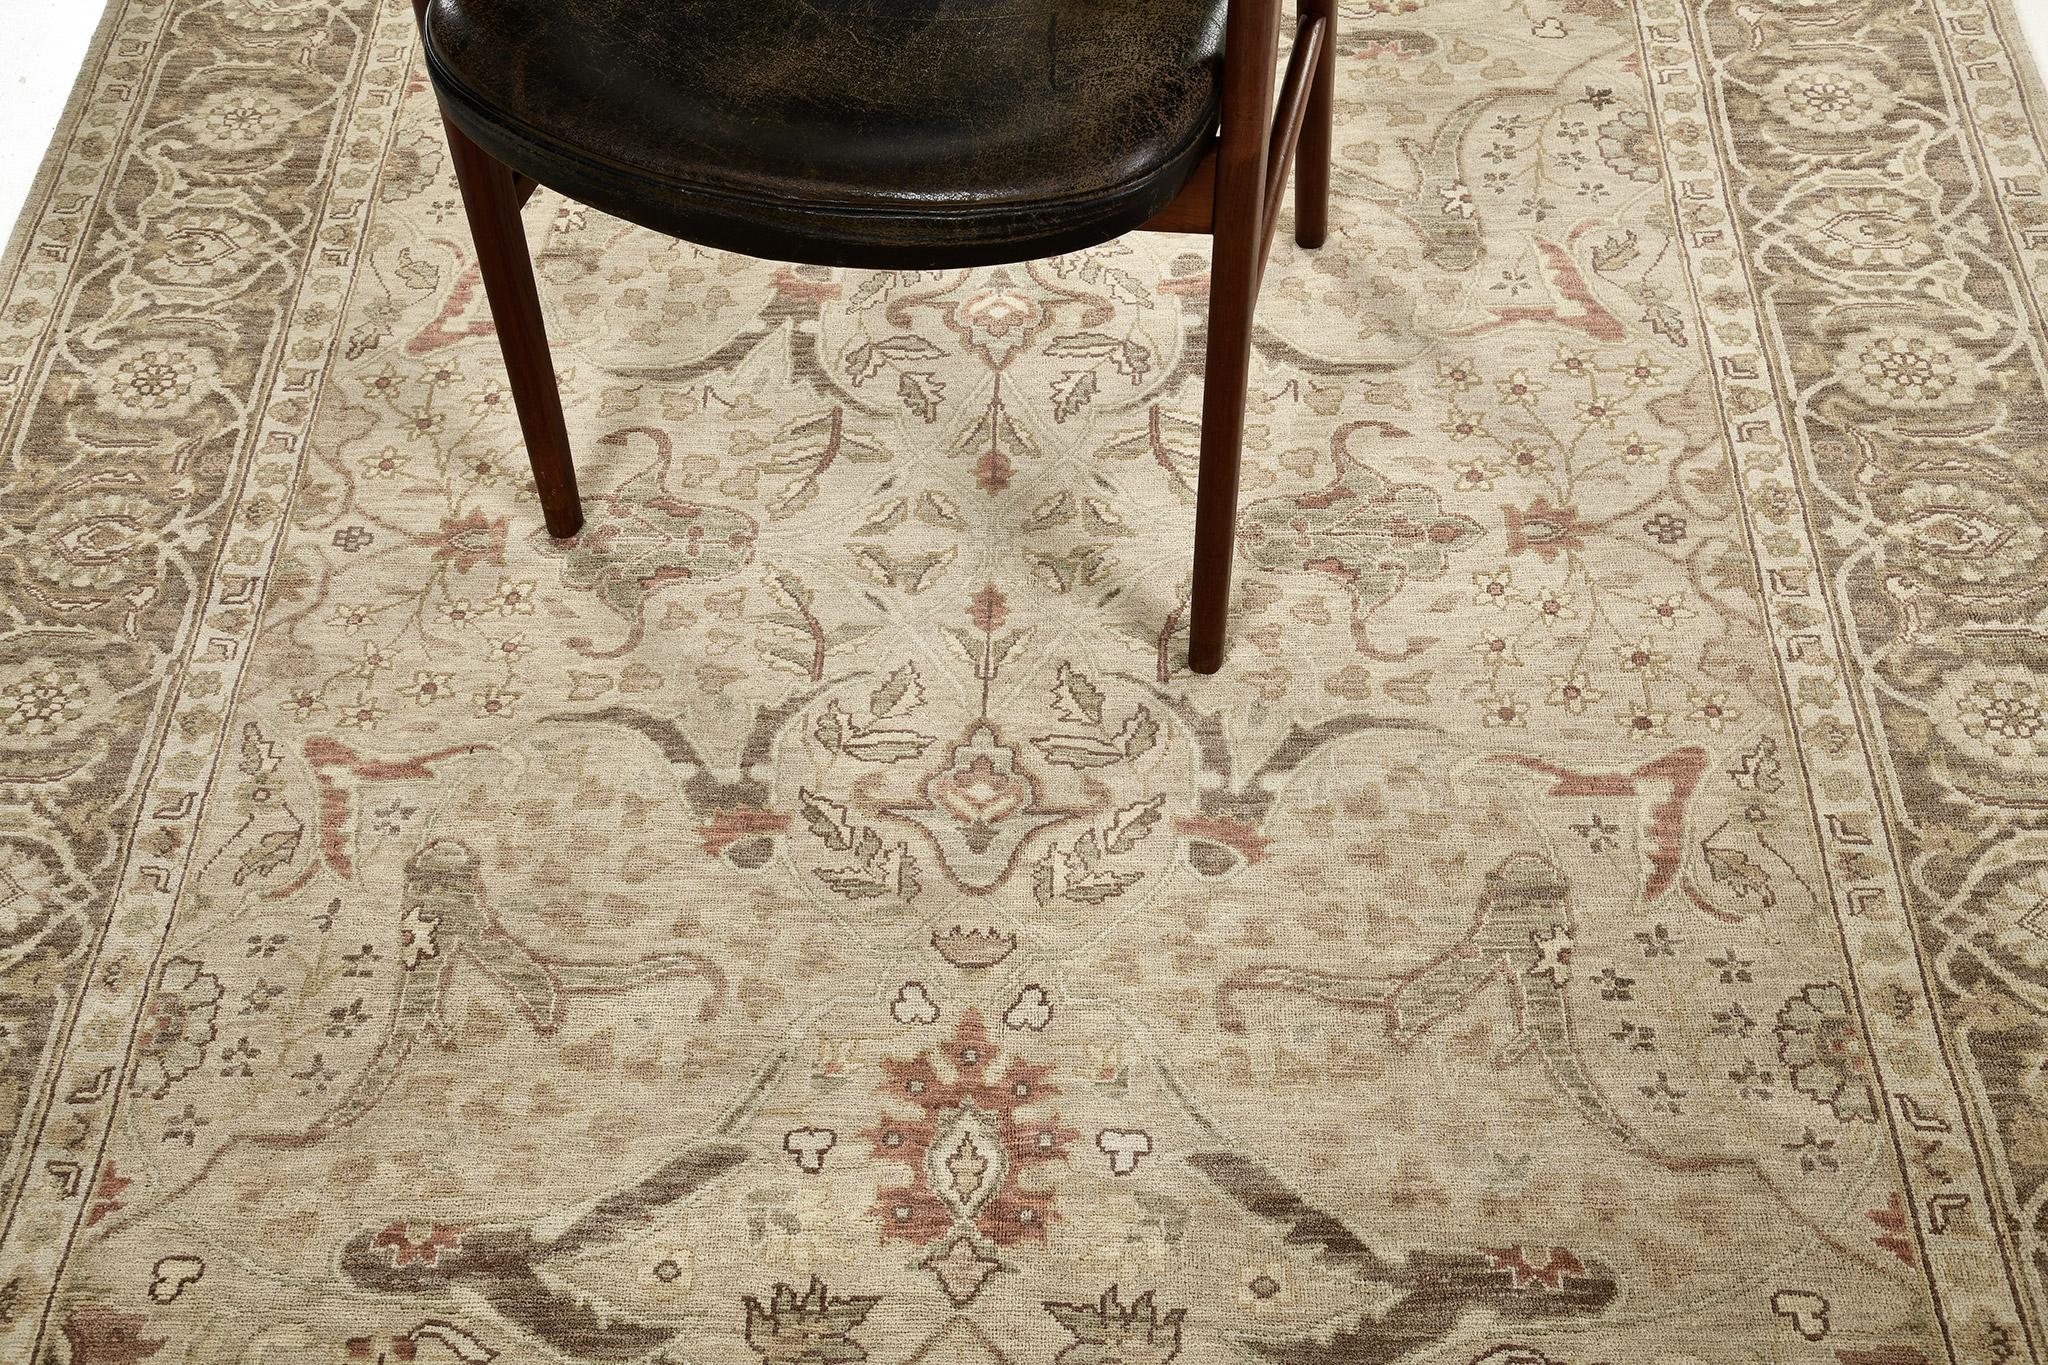 A sophisticated revival of Zeigler Rug that features a large scale design on an attractive beige field with the main border in ash gray symmetrical medallions. The carpet has an overall muted tones of natural colours. Perfect for a minimalist to